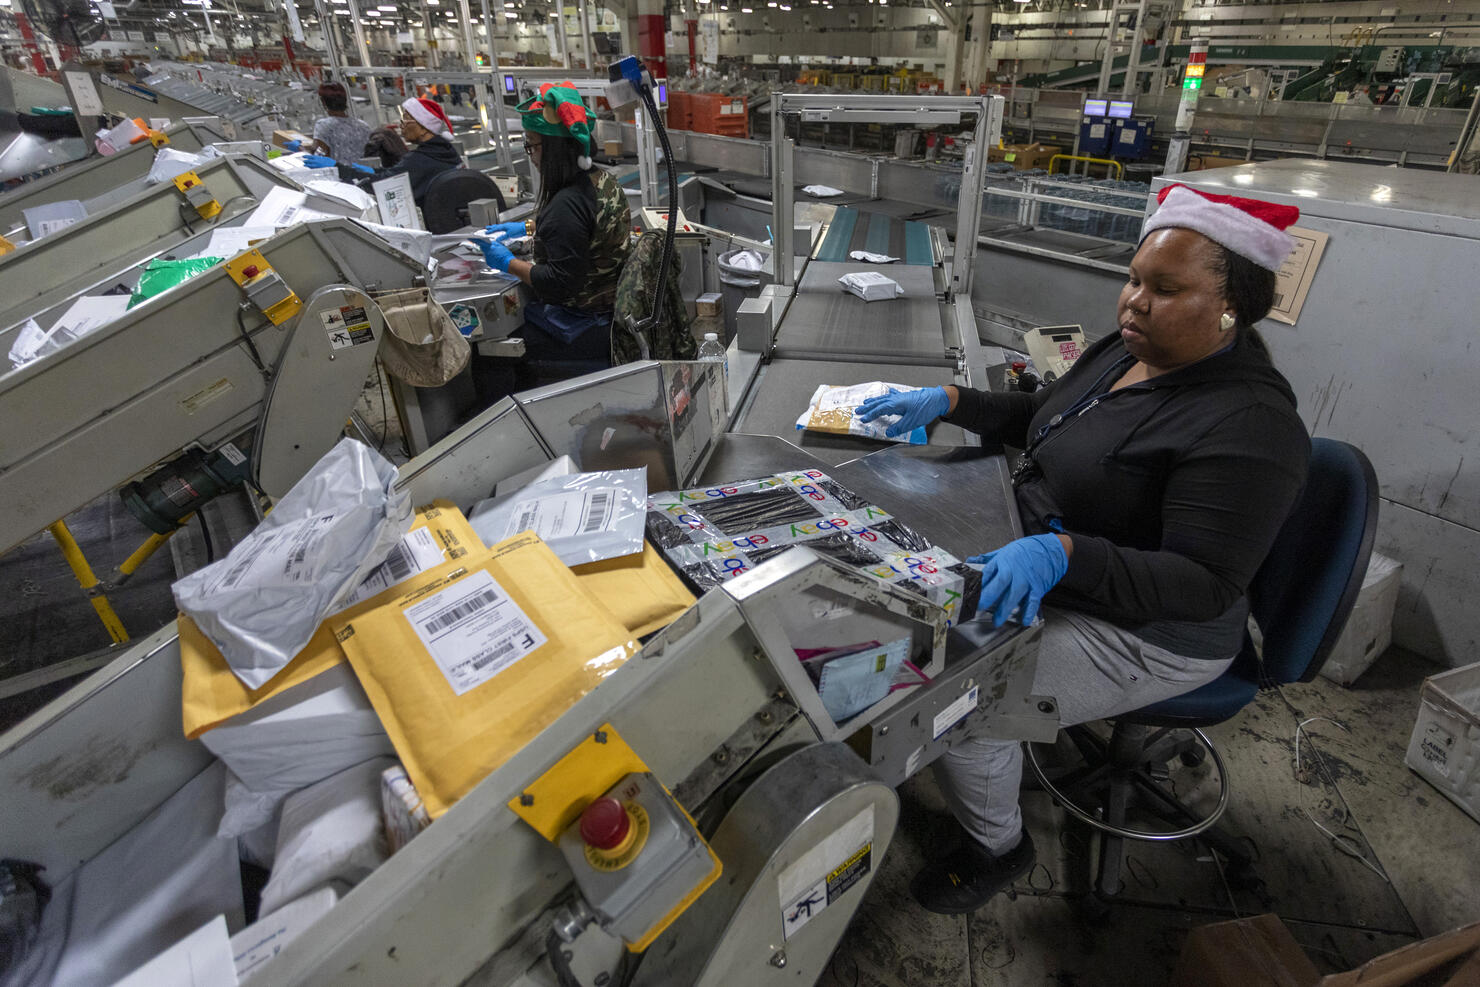 U.S. Postal Service Processes Packages At Los Angeles Distribution Center During Holiday Season